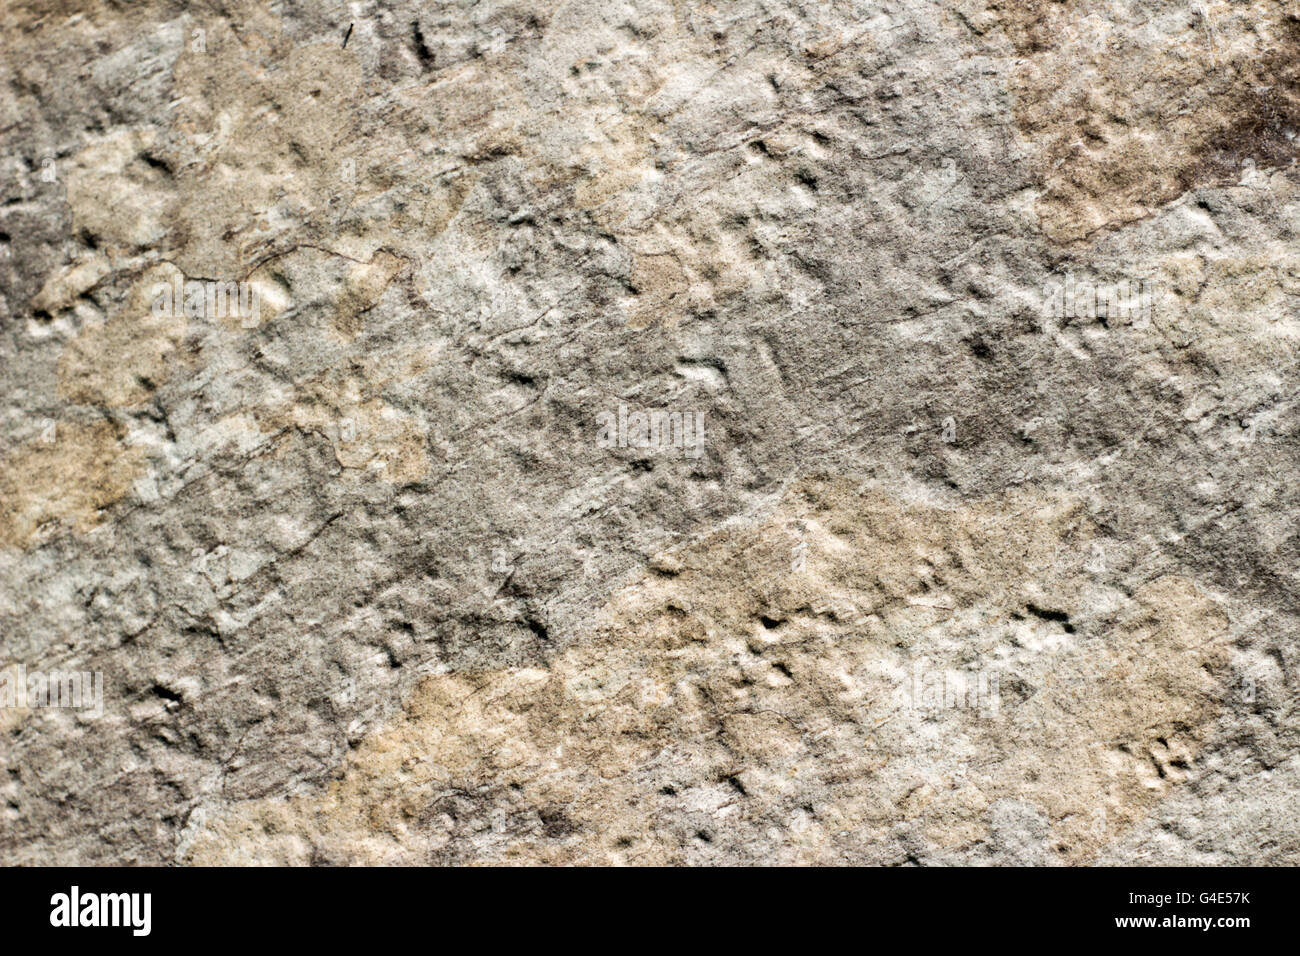 Photograph of a stone texture or background Stock Photo